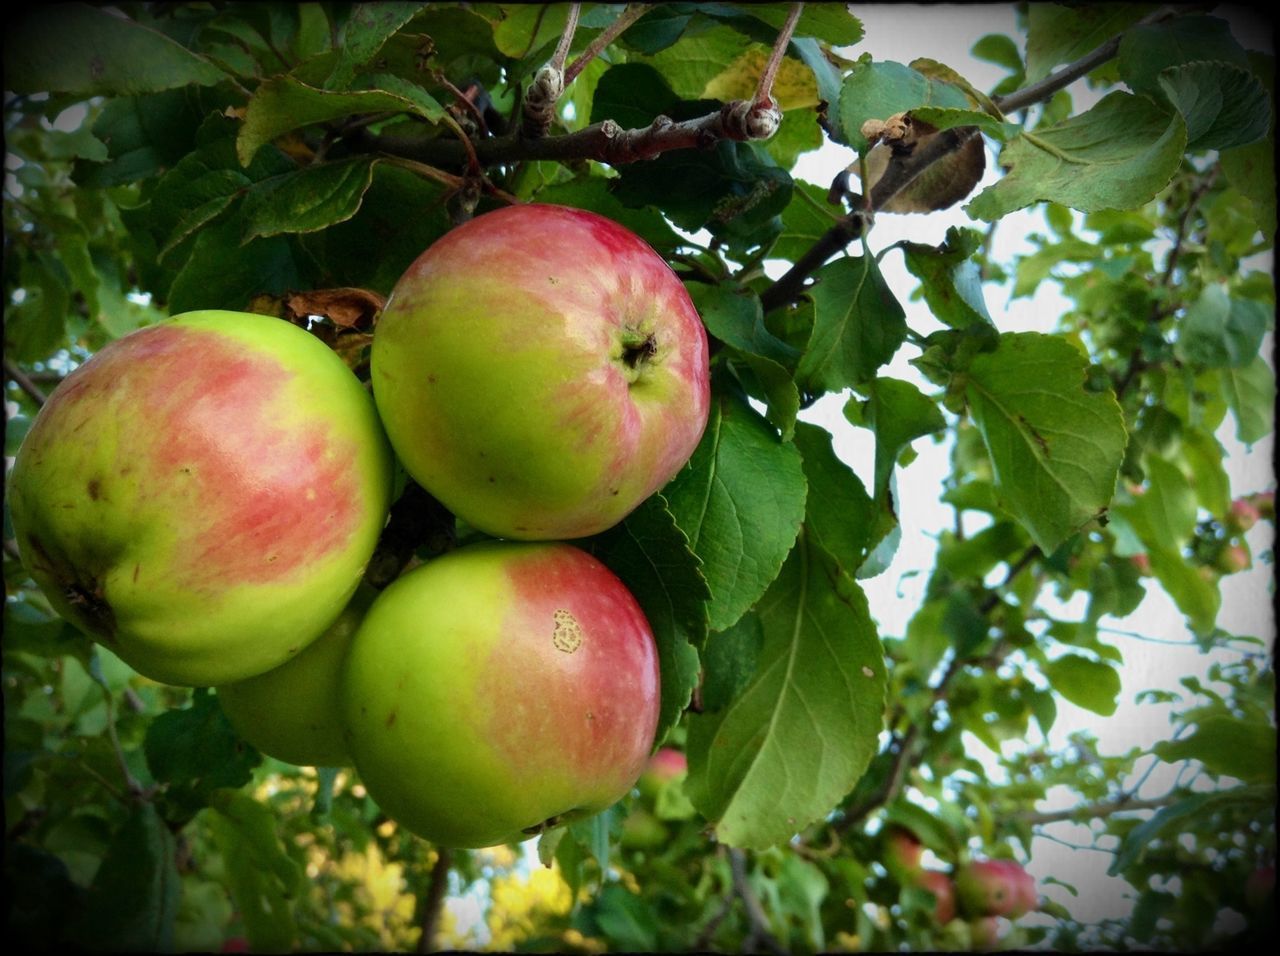 LOW ANGLE VIEW OF APPLES ON TREE